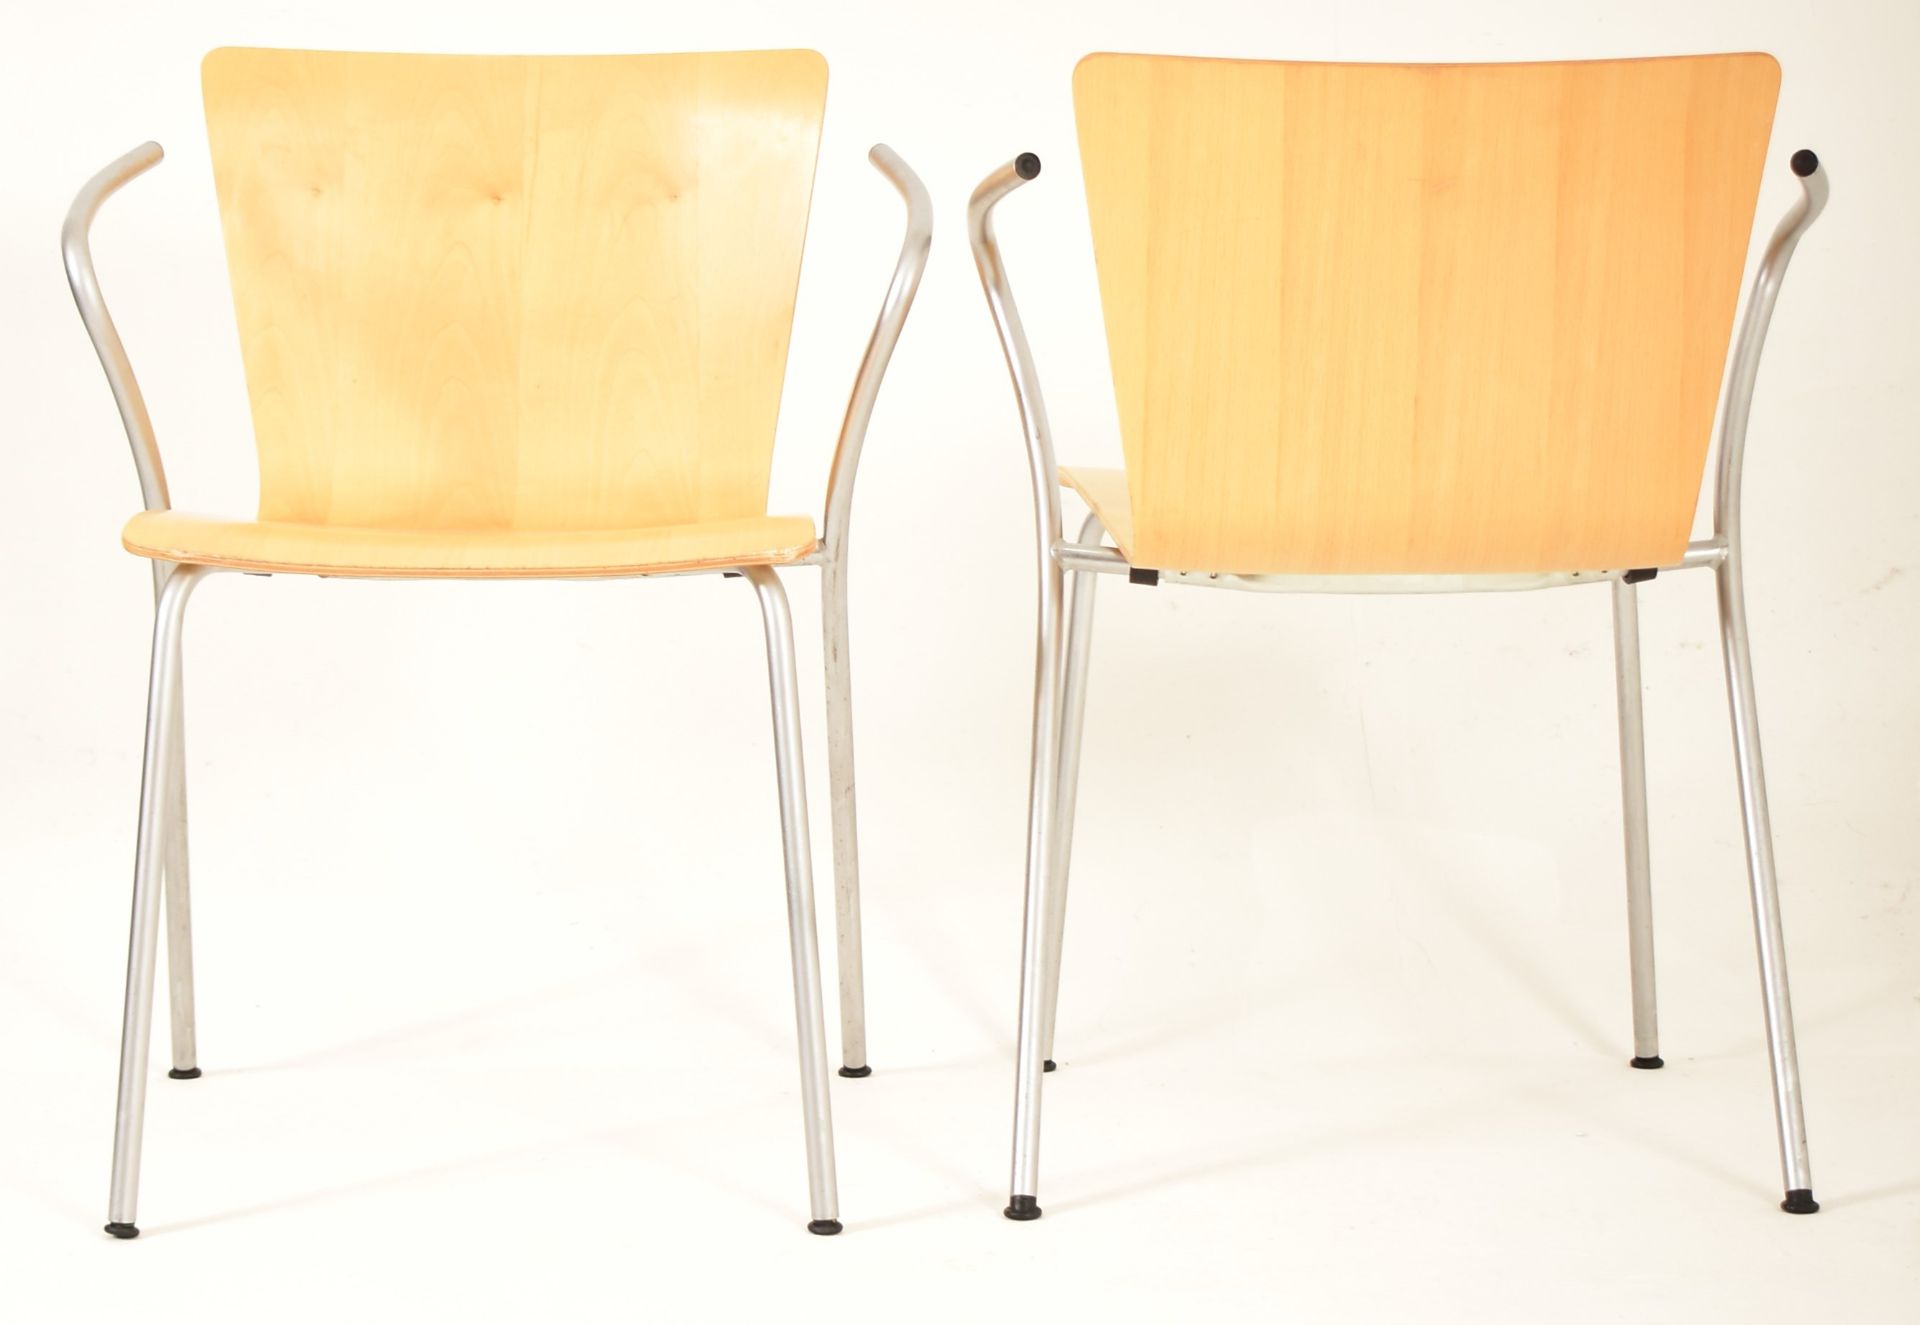 VICO MAGISTRETTI FOR FRITZ HANSEN - VICO DUO - SIX DINING CHAIRS - Image 3 of 6